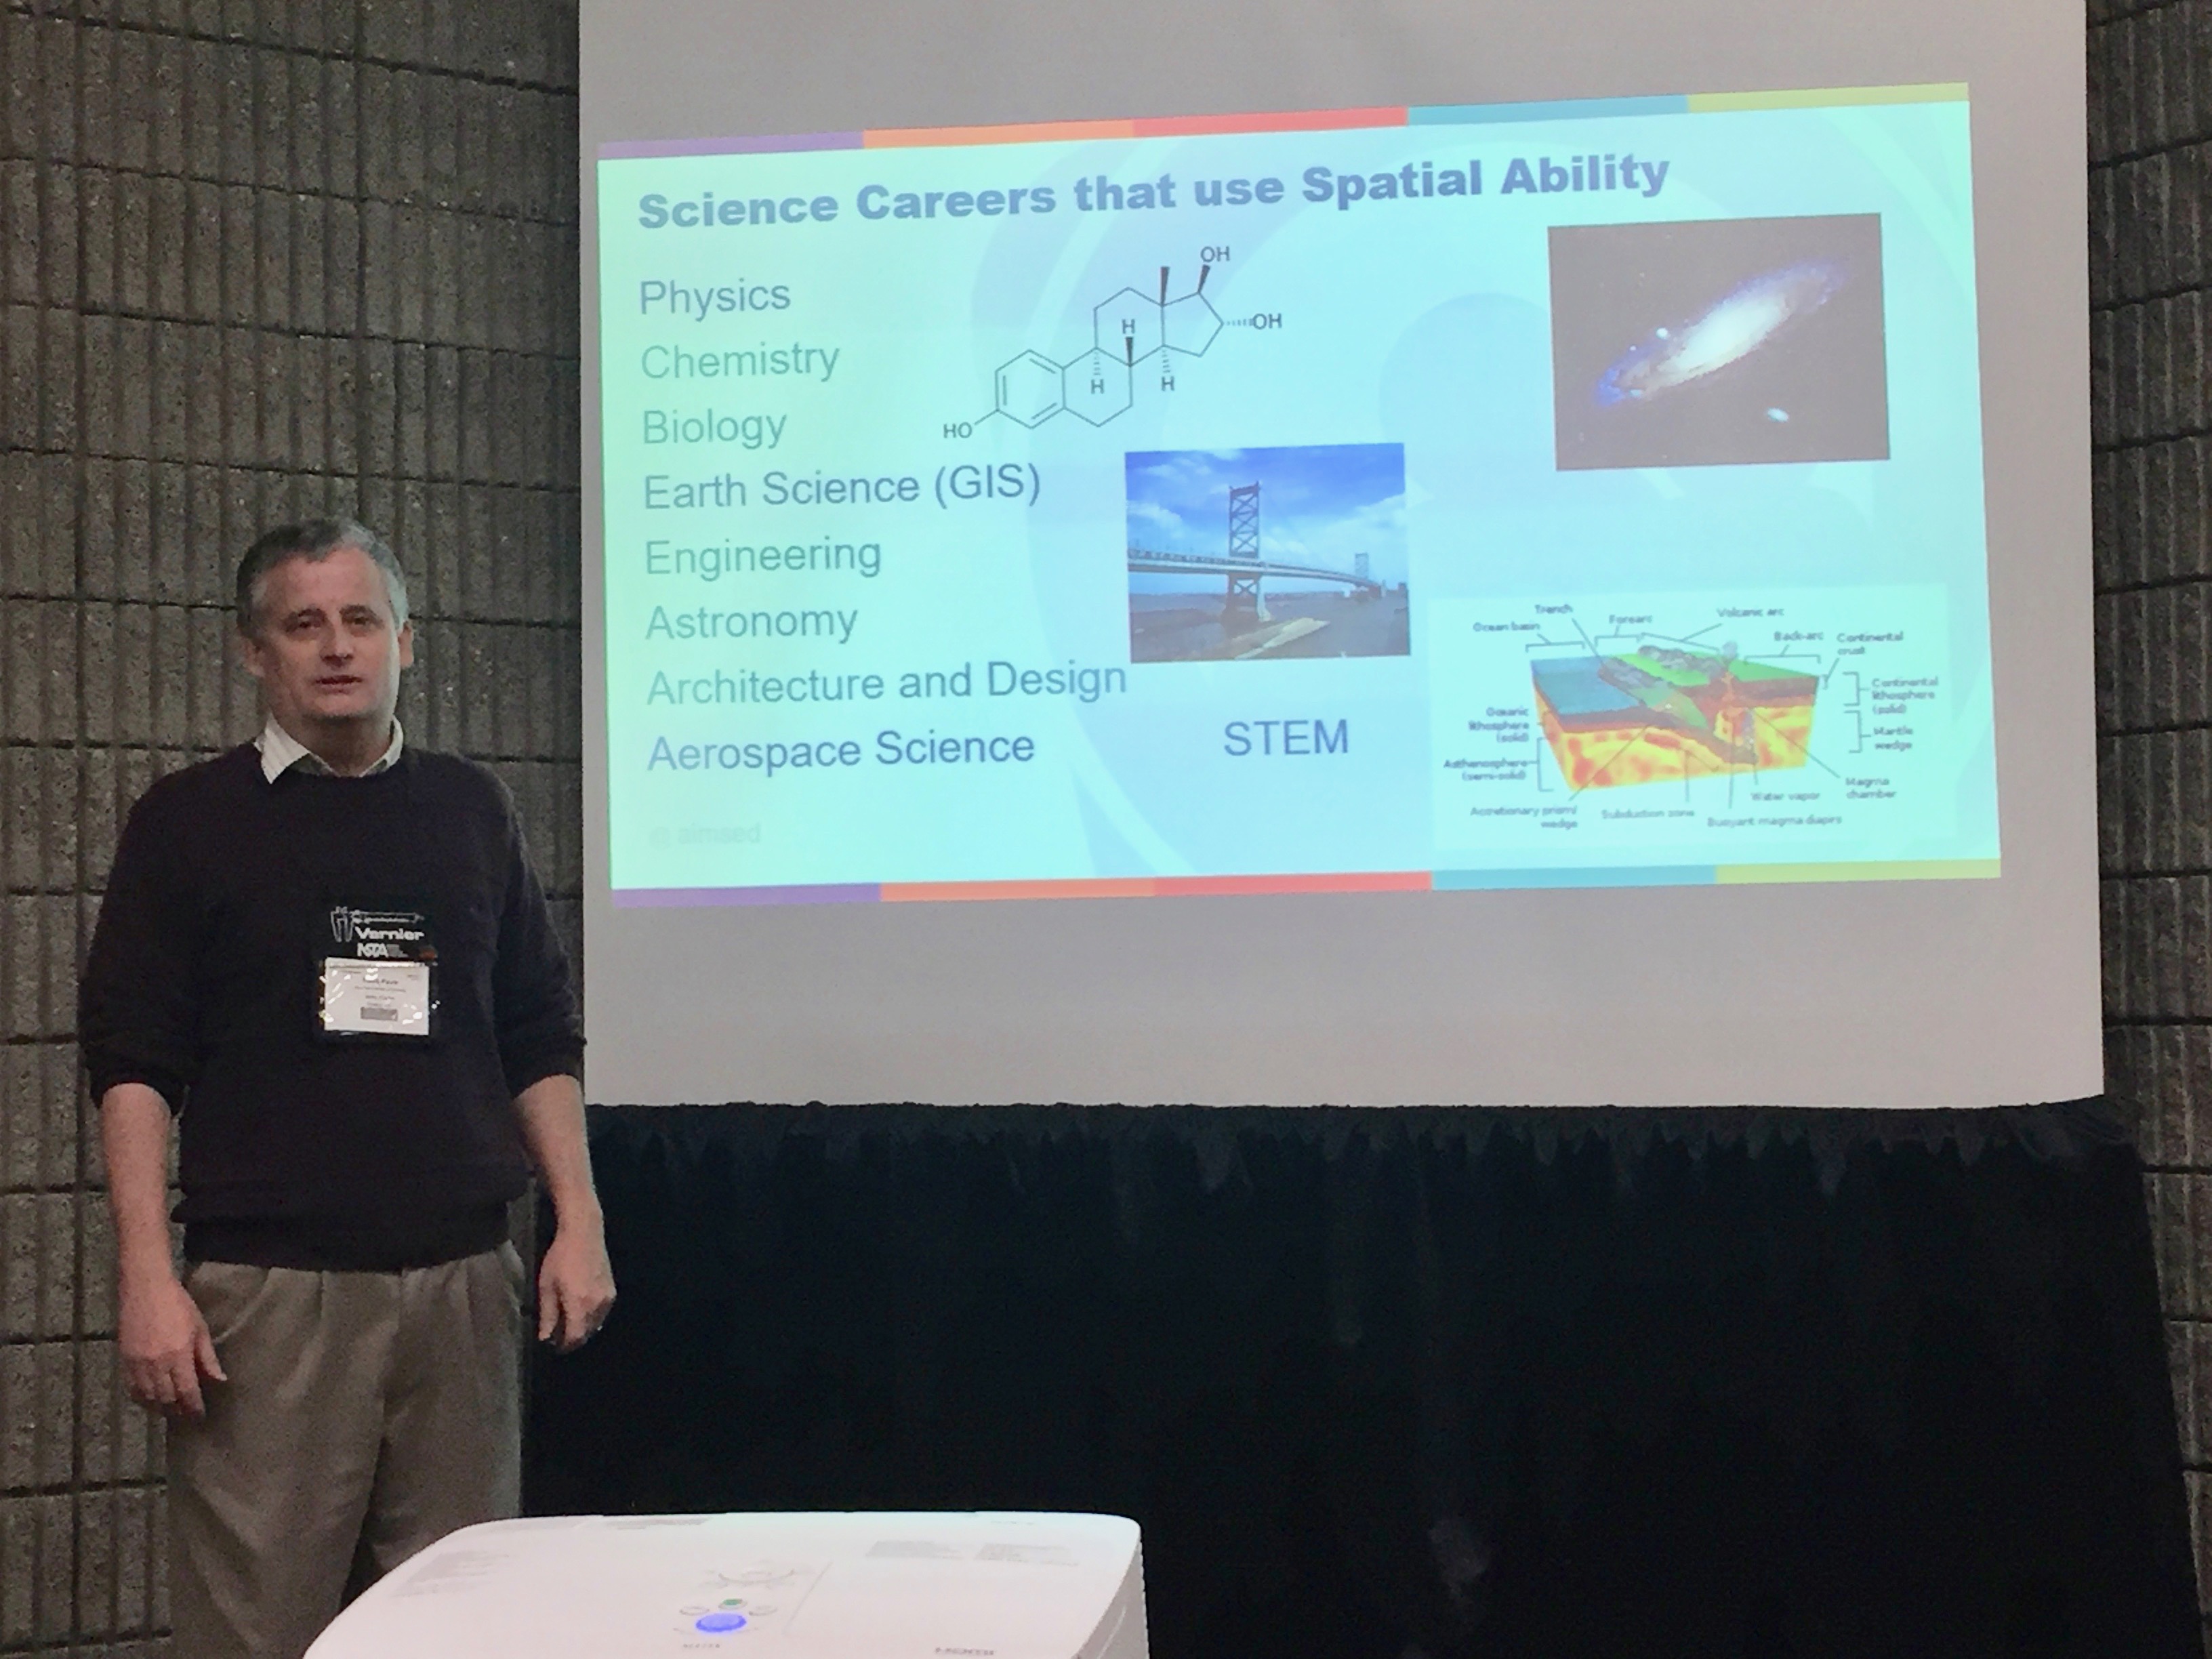 Presenter and slide listing all the science careers that involve spatial ability (all of them).